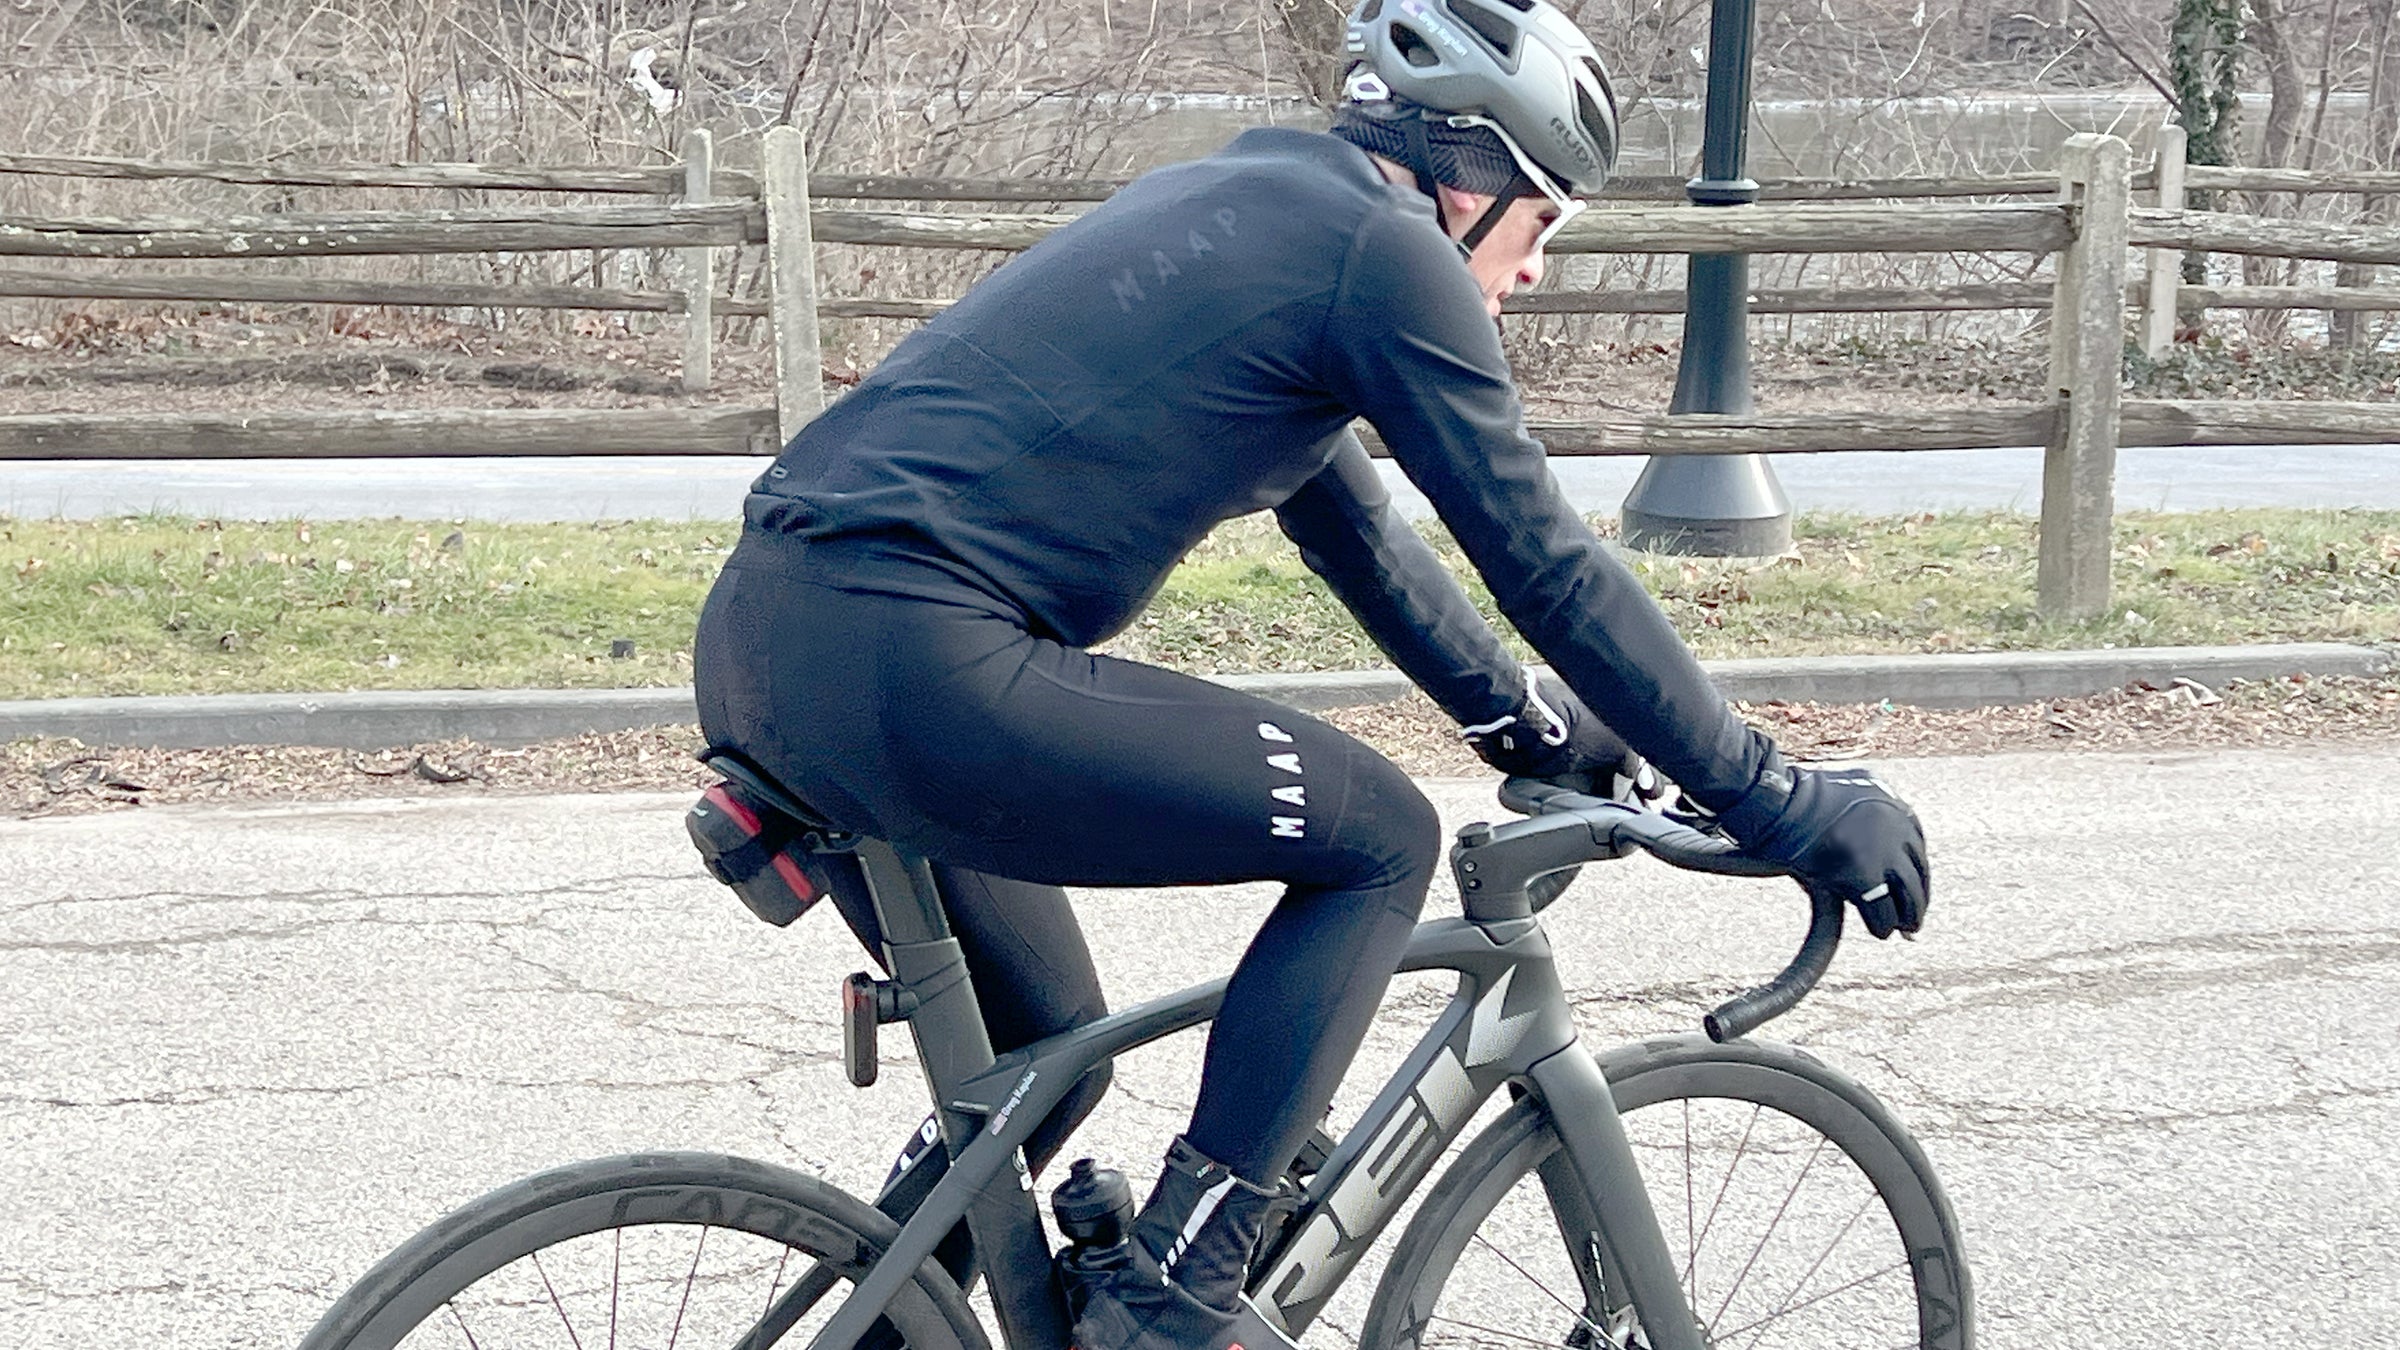 Review: MAAP cold weather cycling kit - Velo